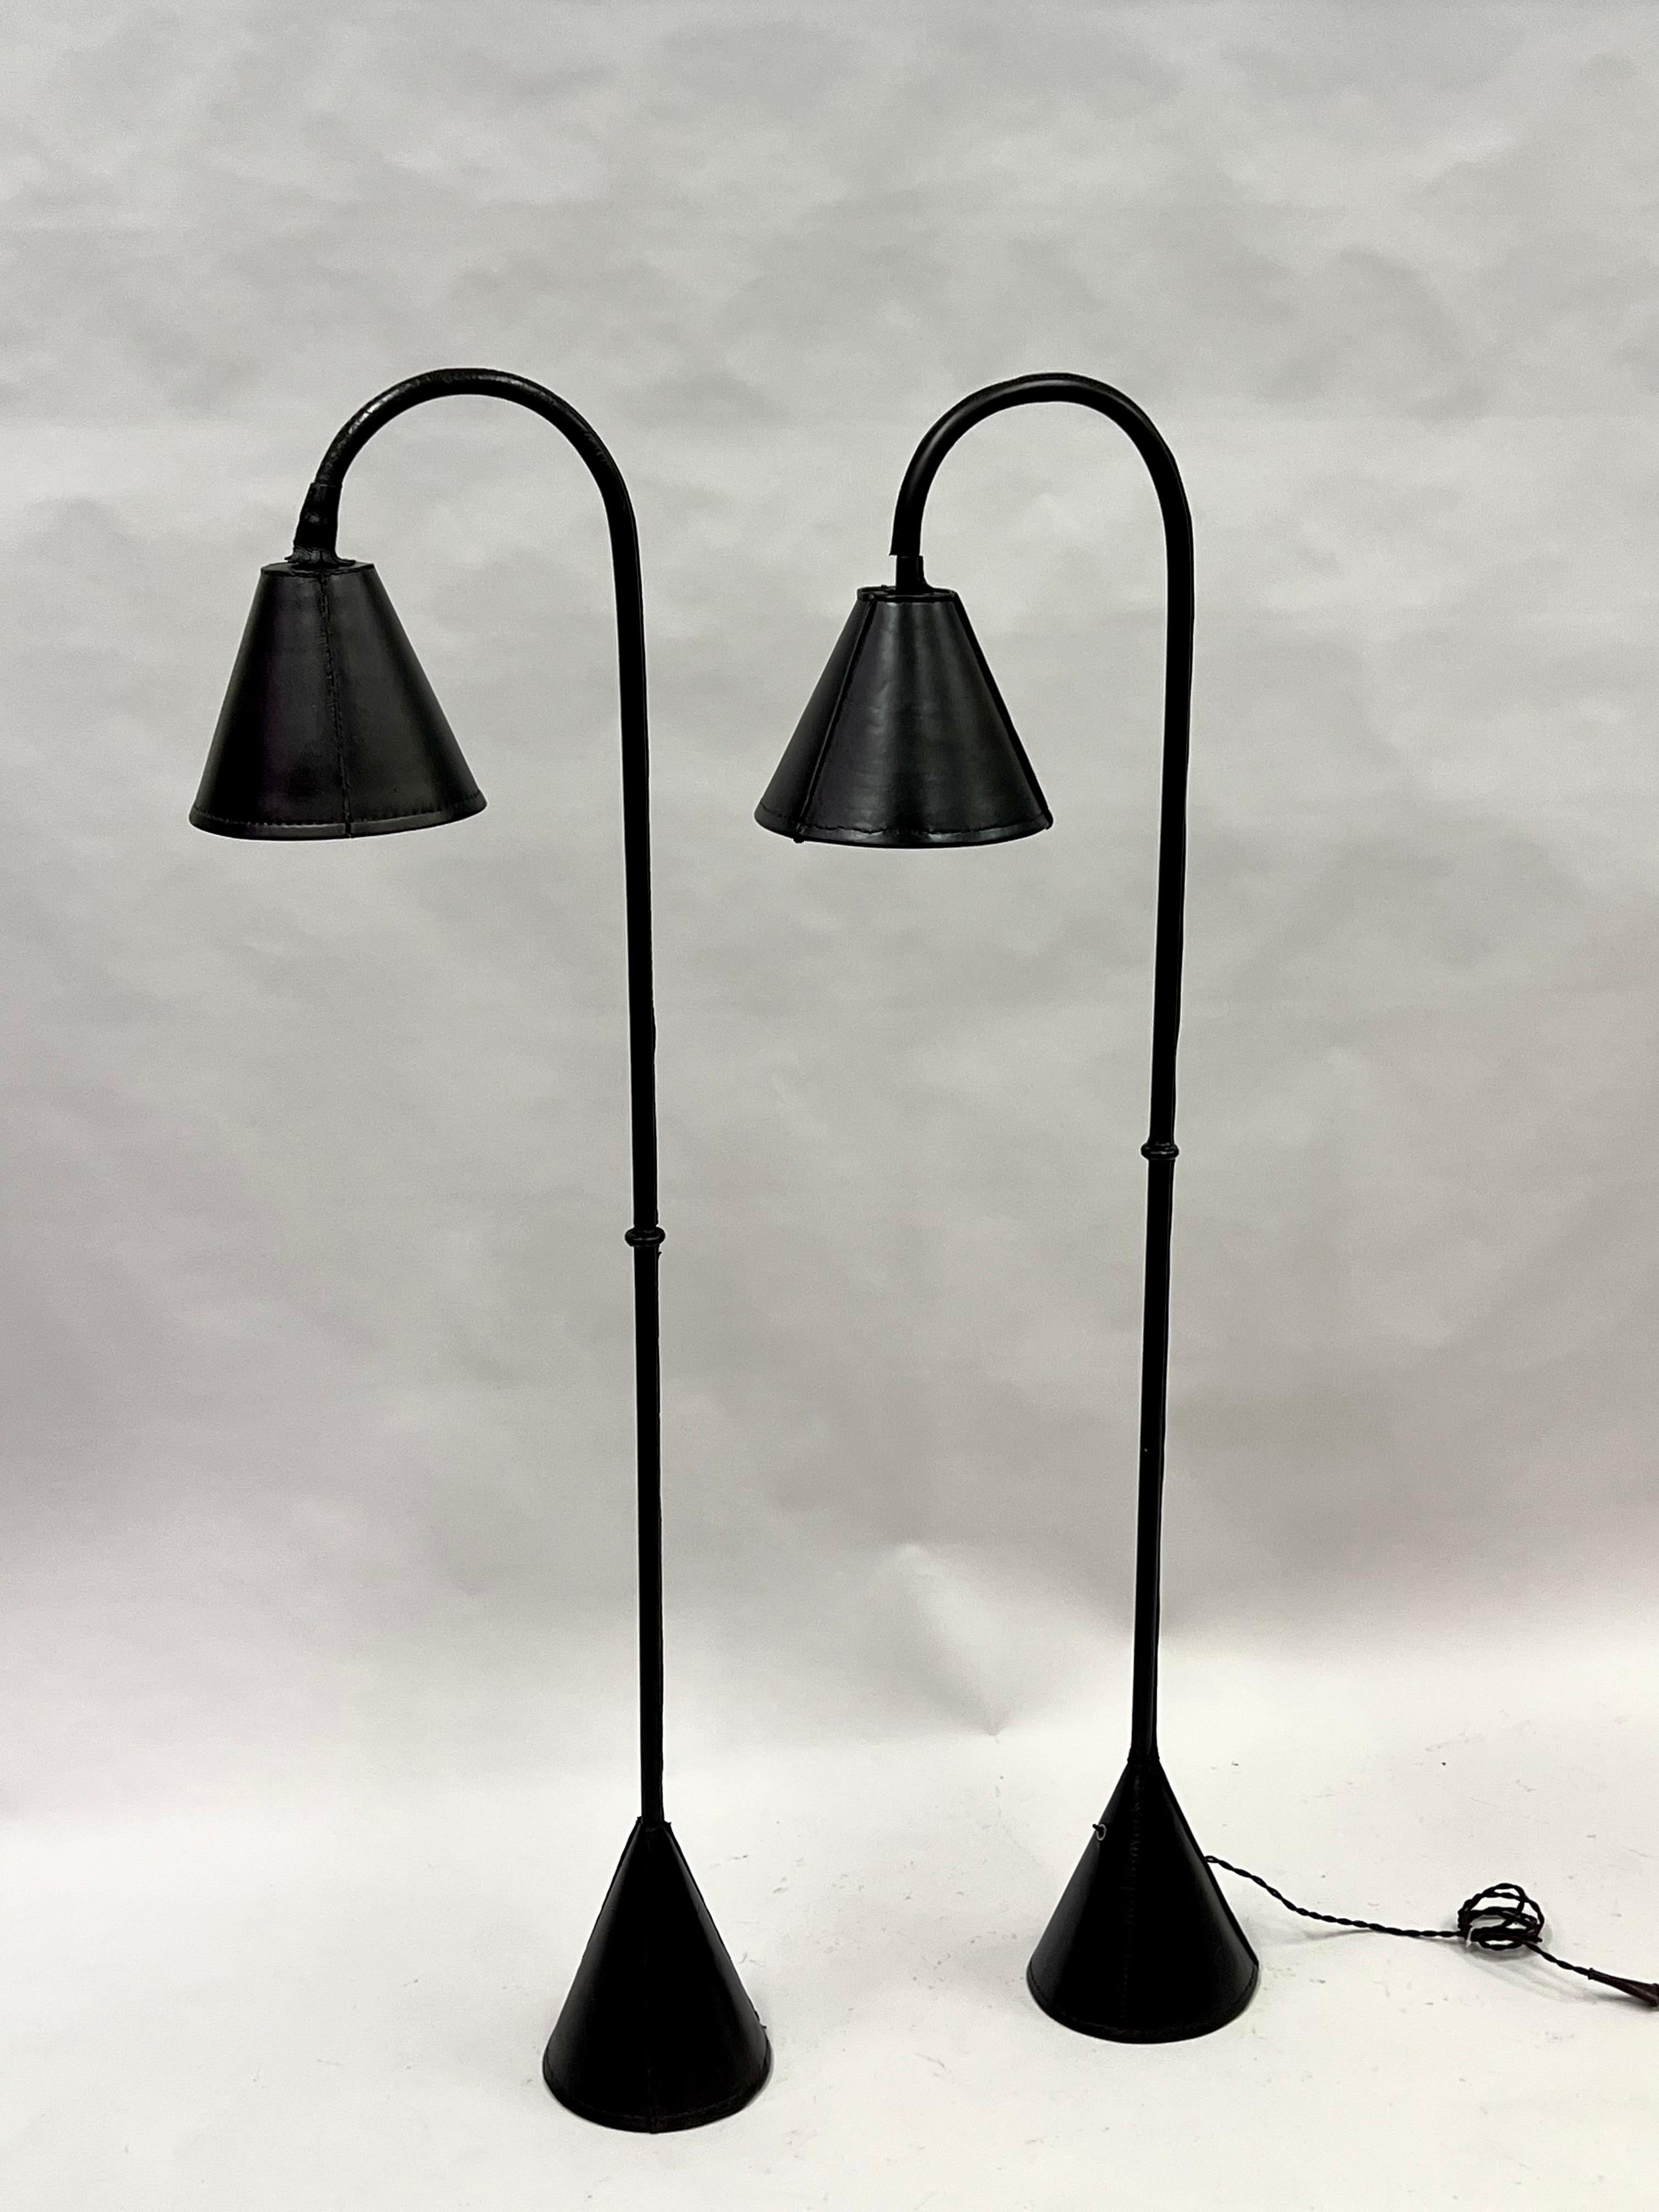 An Elegant Pair of French Midcentury Modern Floor Lamps in Hand Stitched 
Black Leather by the French Master 20th Century Designer, Jacques Adnet circa 1955. This classic hand made model from the renowned French designer, Jacques Adnet is sought